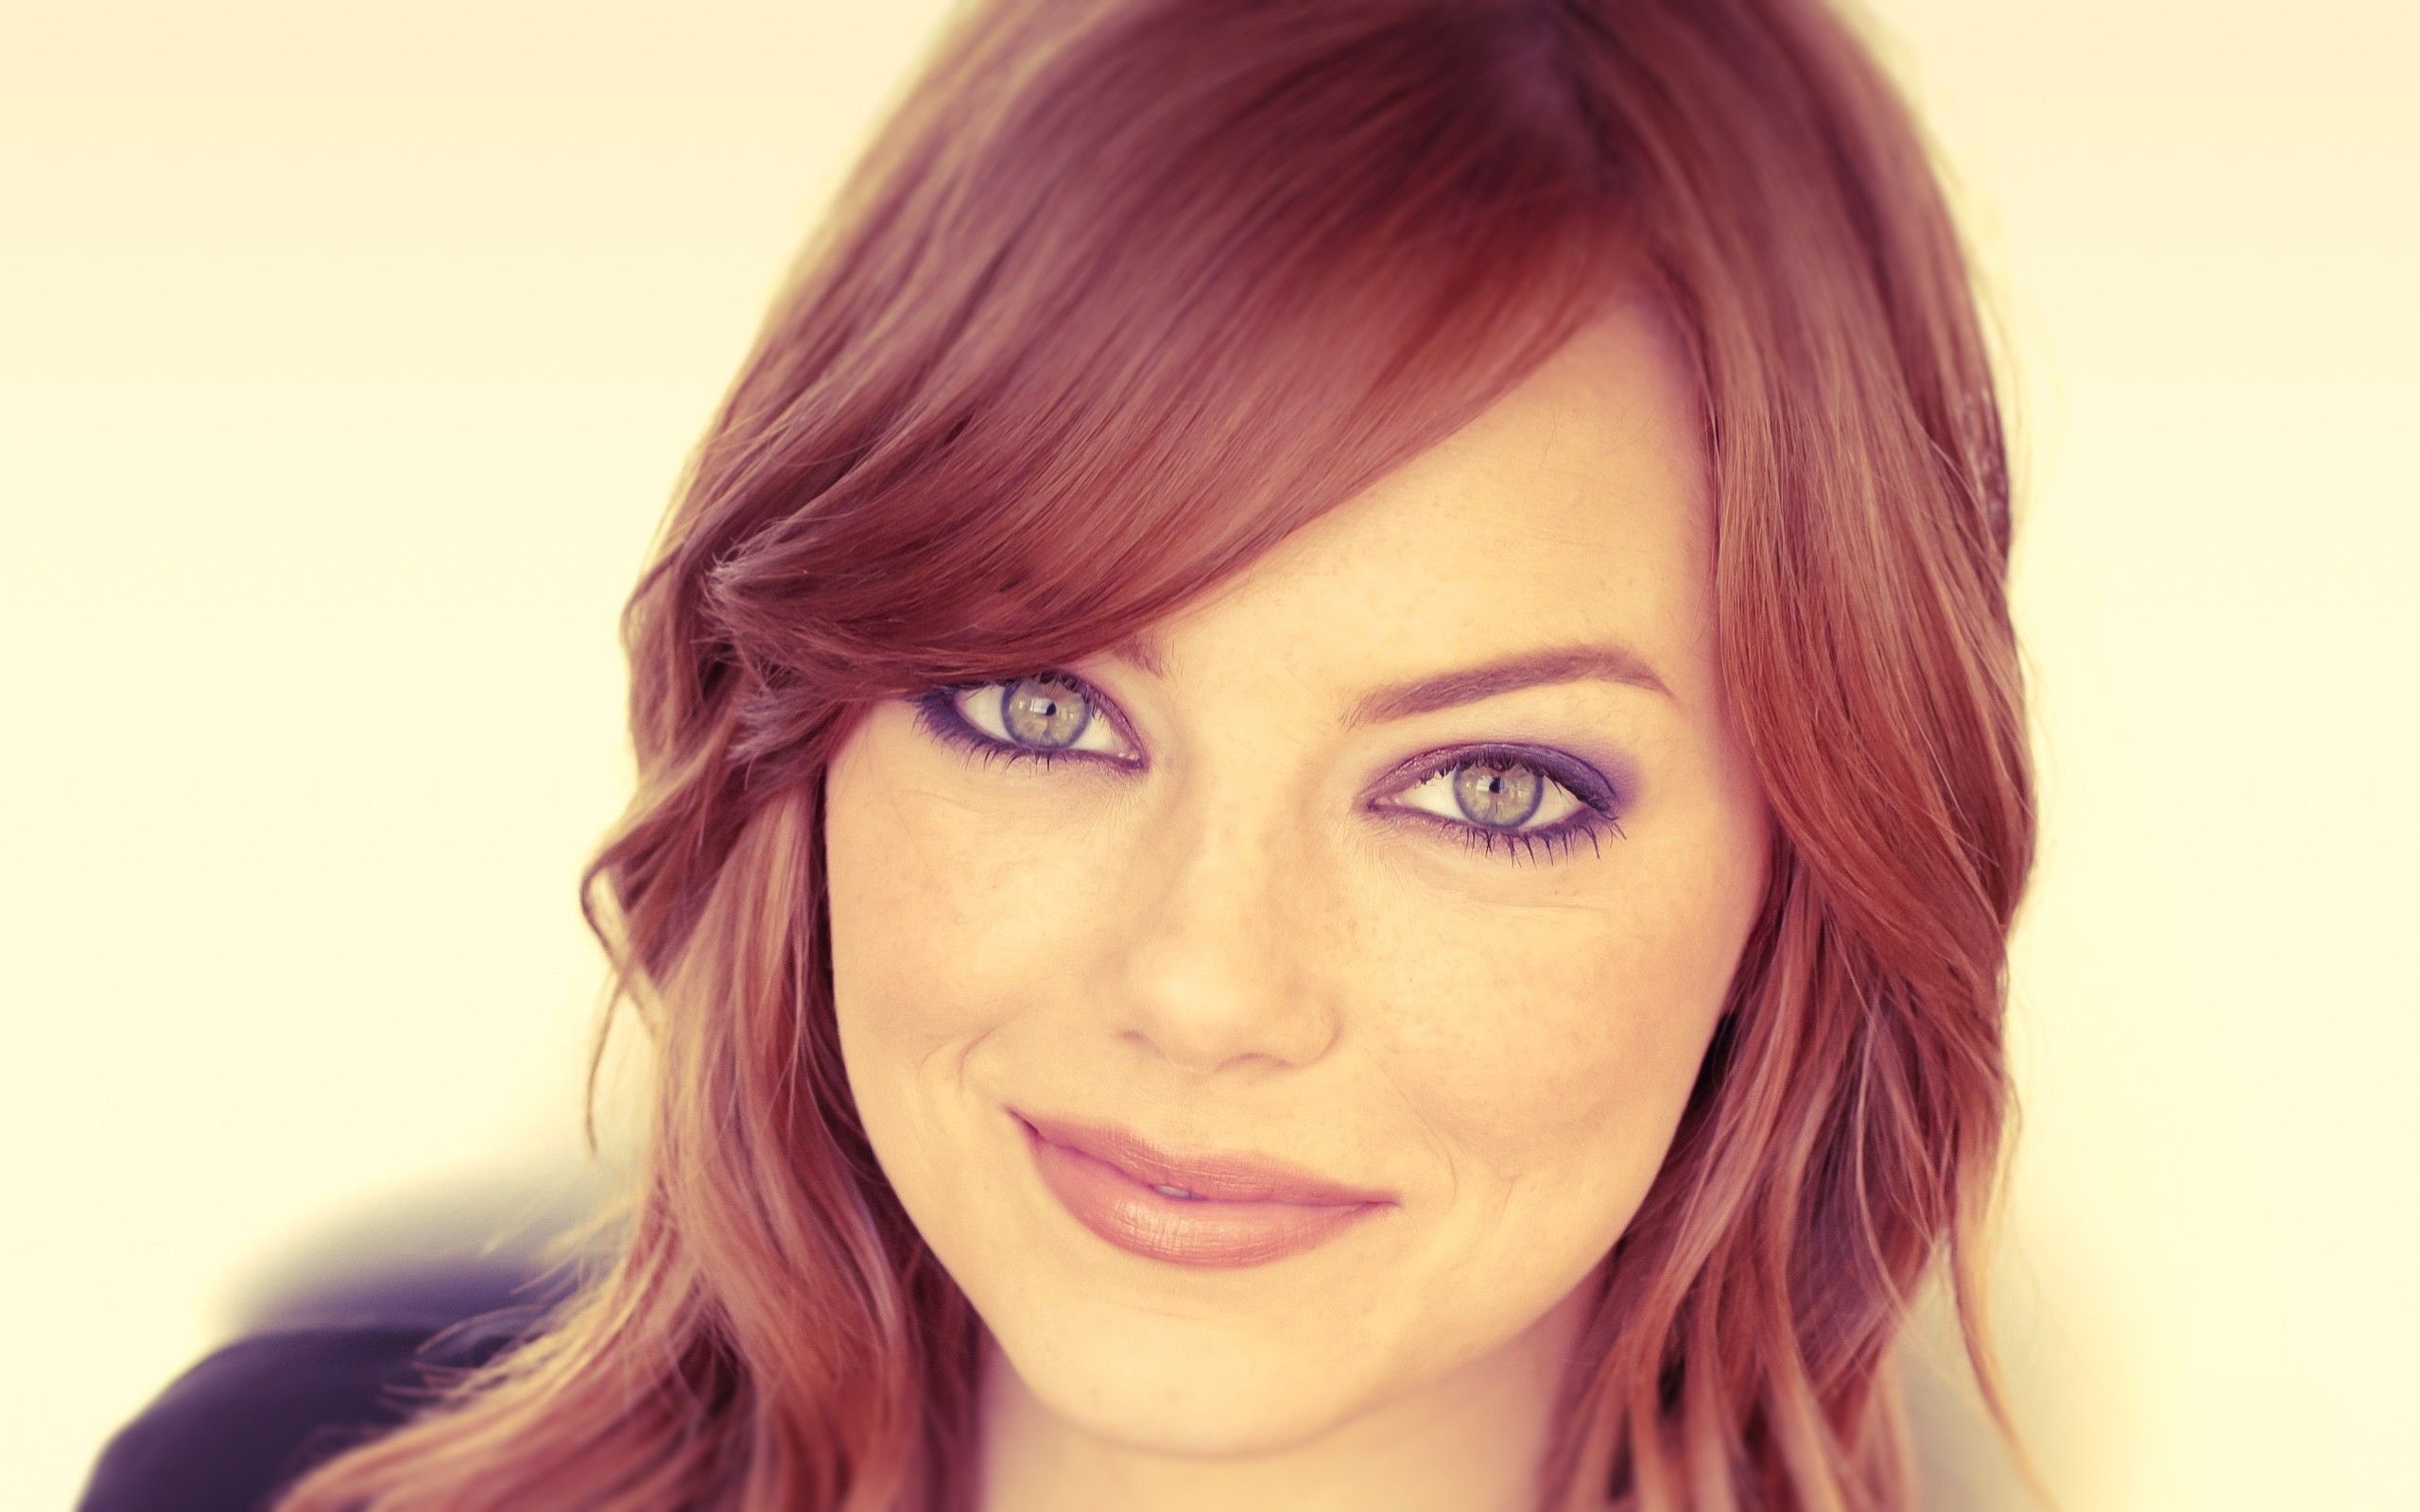 Emma Stone movies, Beautiful wallpapers, Celebrity charm, Exquisite image, 2560x1600 HD Desktop